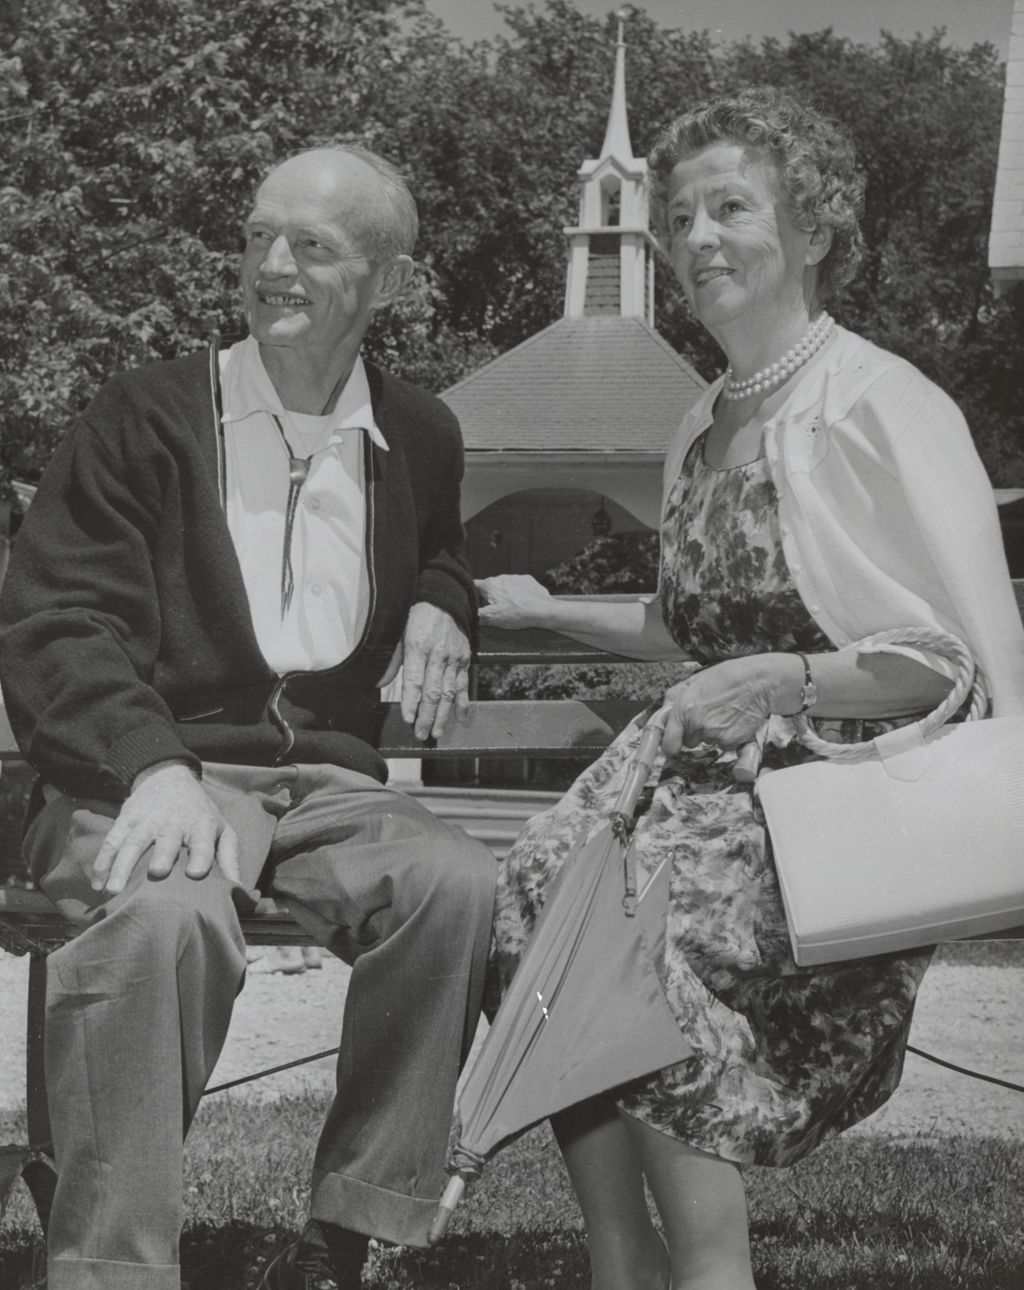 Miniature of Robert Hicks, former co-director of Bowen Country Club, and Helen Bowen Blair sitting on a bench on the grass at Bowen Country Club 50th Anniversary celebration